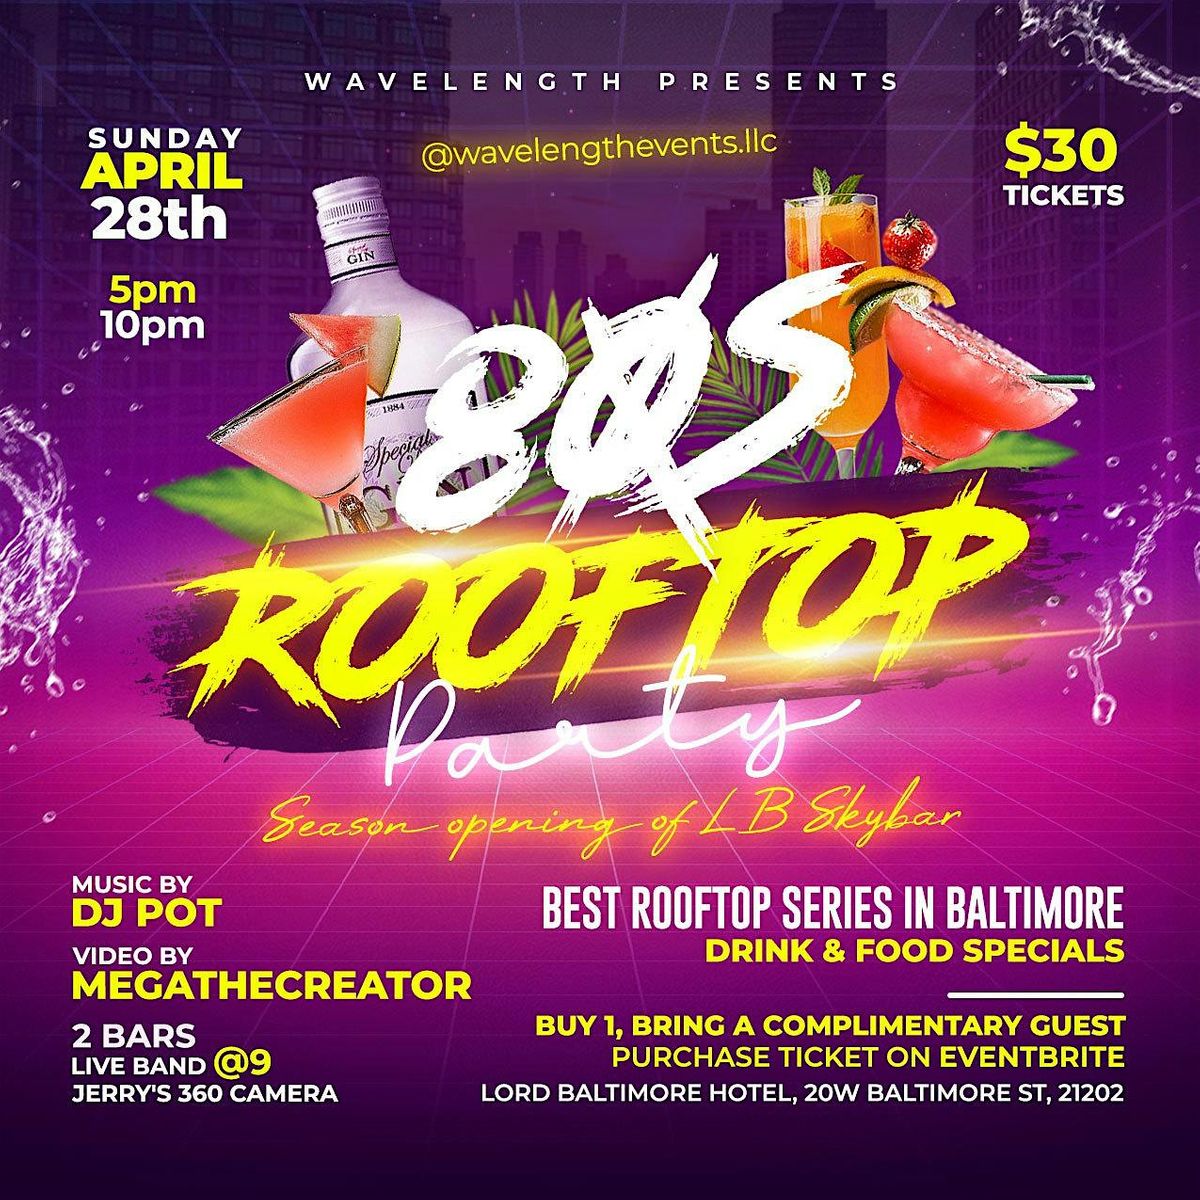 80's Rooftop Party! Season opening of LB SkyBar